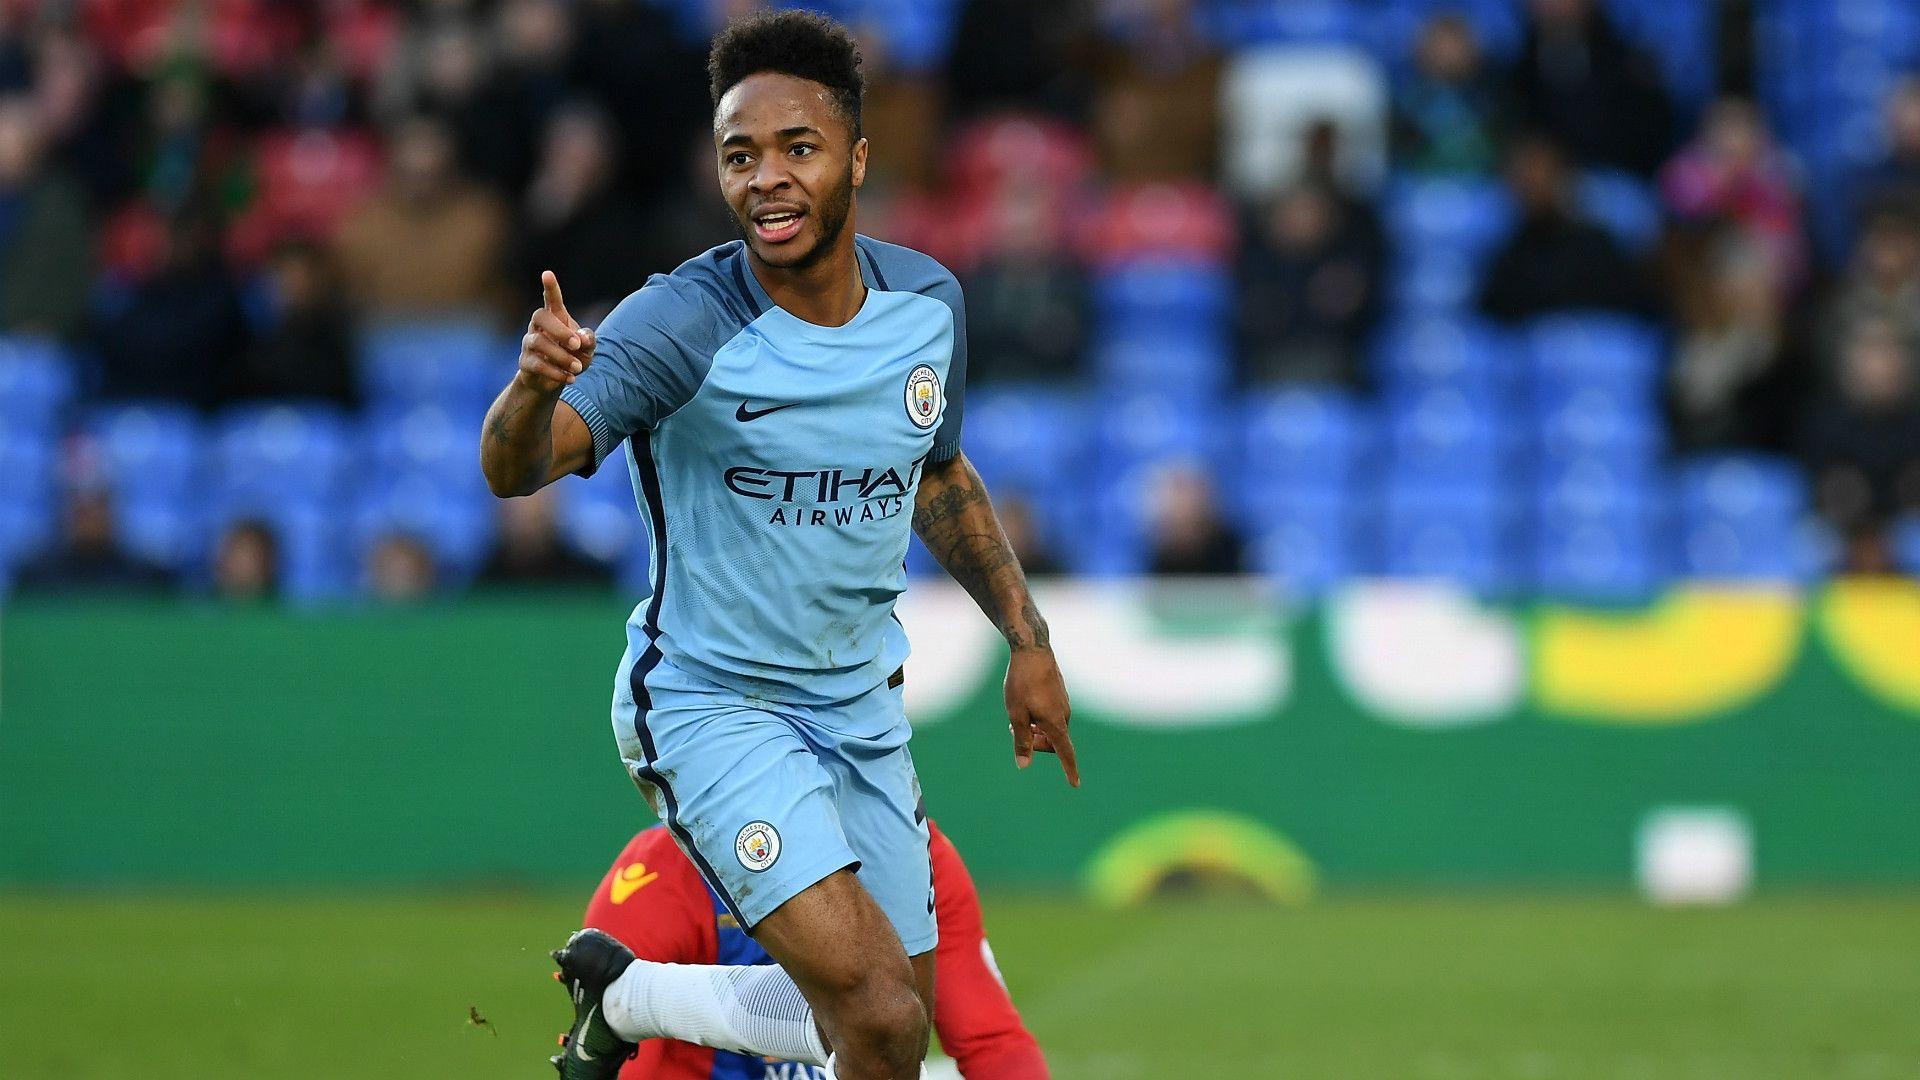 Sane hails Sterling influence at Manchester City